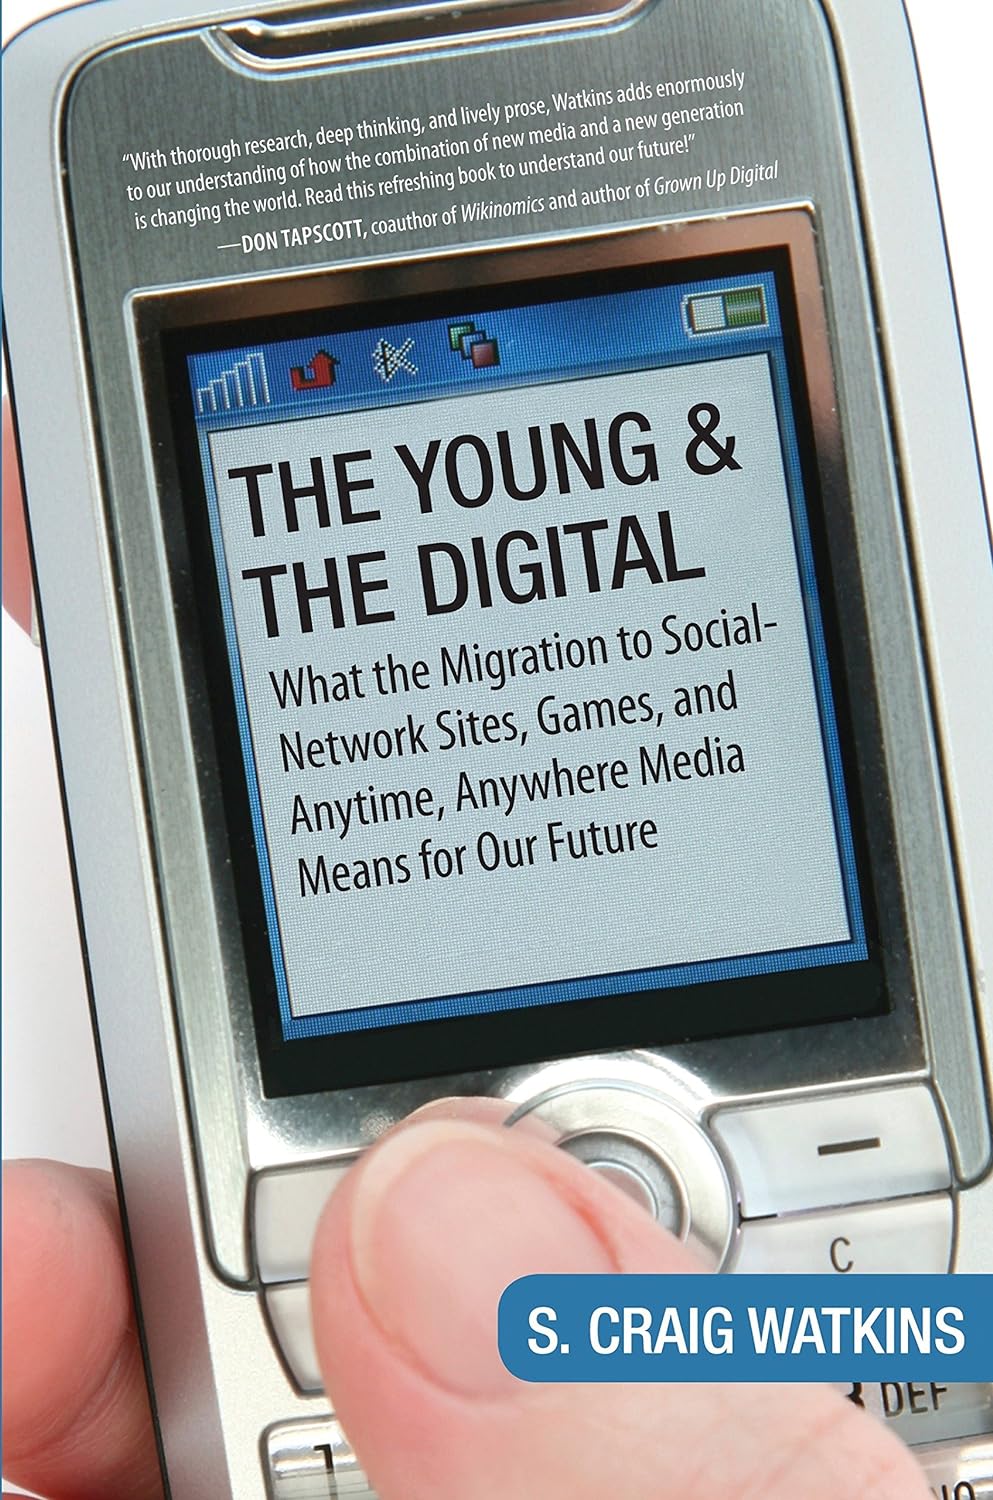 The Young and the Digital: What the Migration to Social Network Sites, Games, and Anytime, Anywhere Media Means for our Future, by S. Craig Watkins